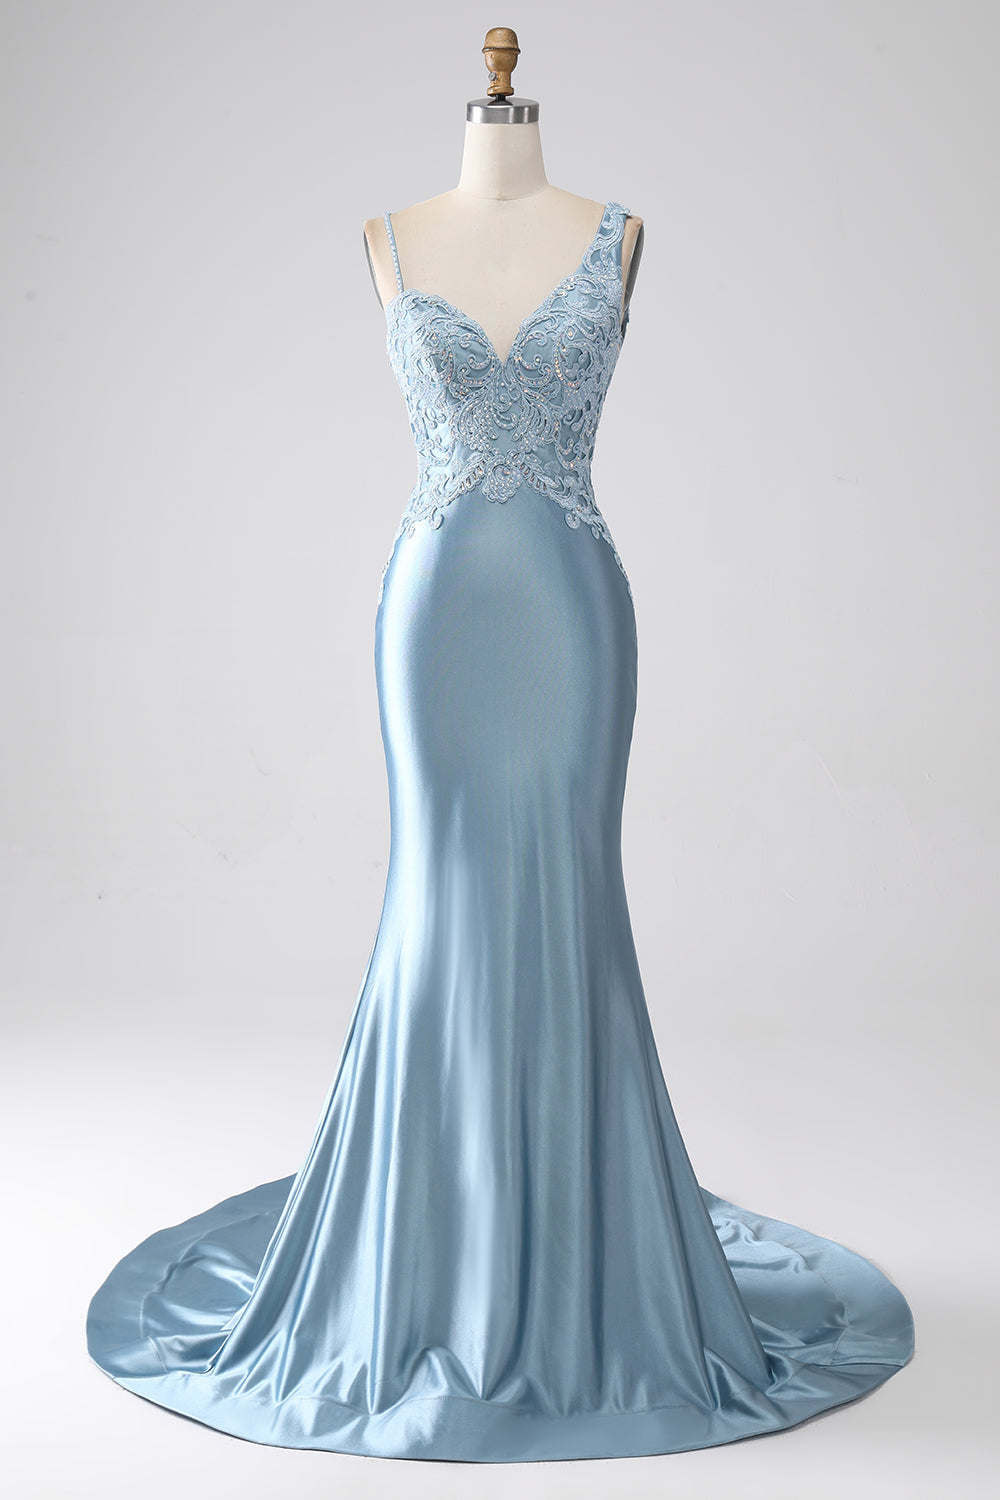 Grey Blue Mermaid Spaghetti Straps Long Beaded Prom Dress With Appliques